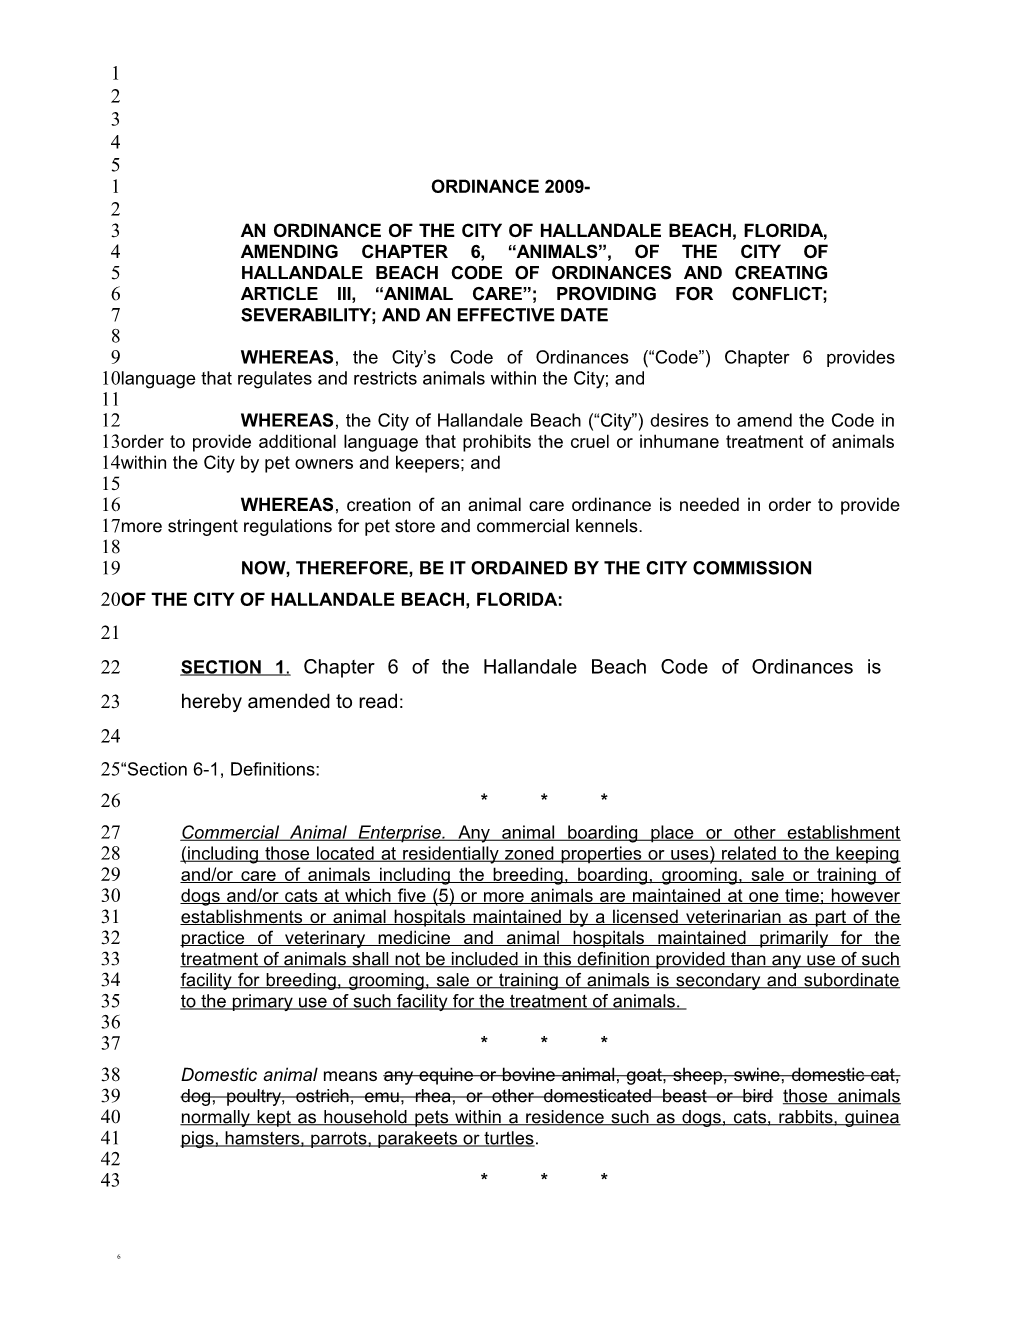 An Ordinance of the City of Hallandale Beach, Florida, Amending Chapter 6, Animals , Of